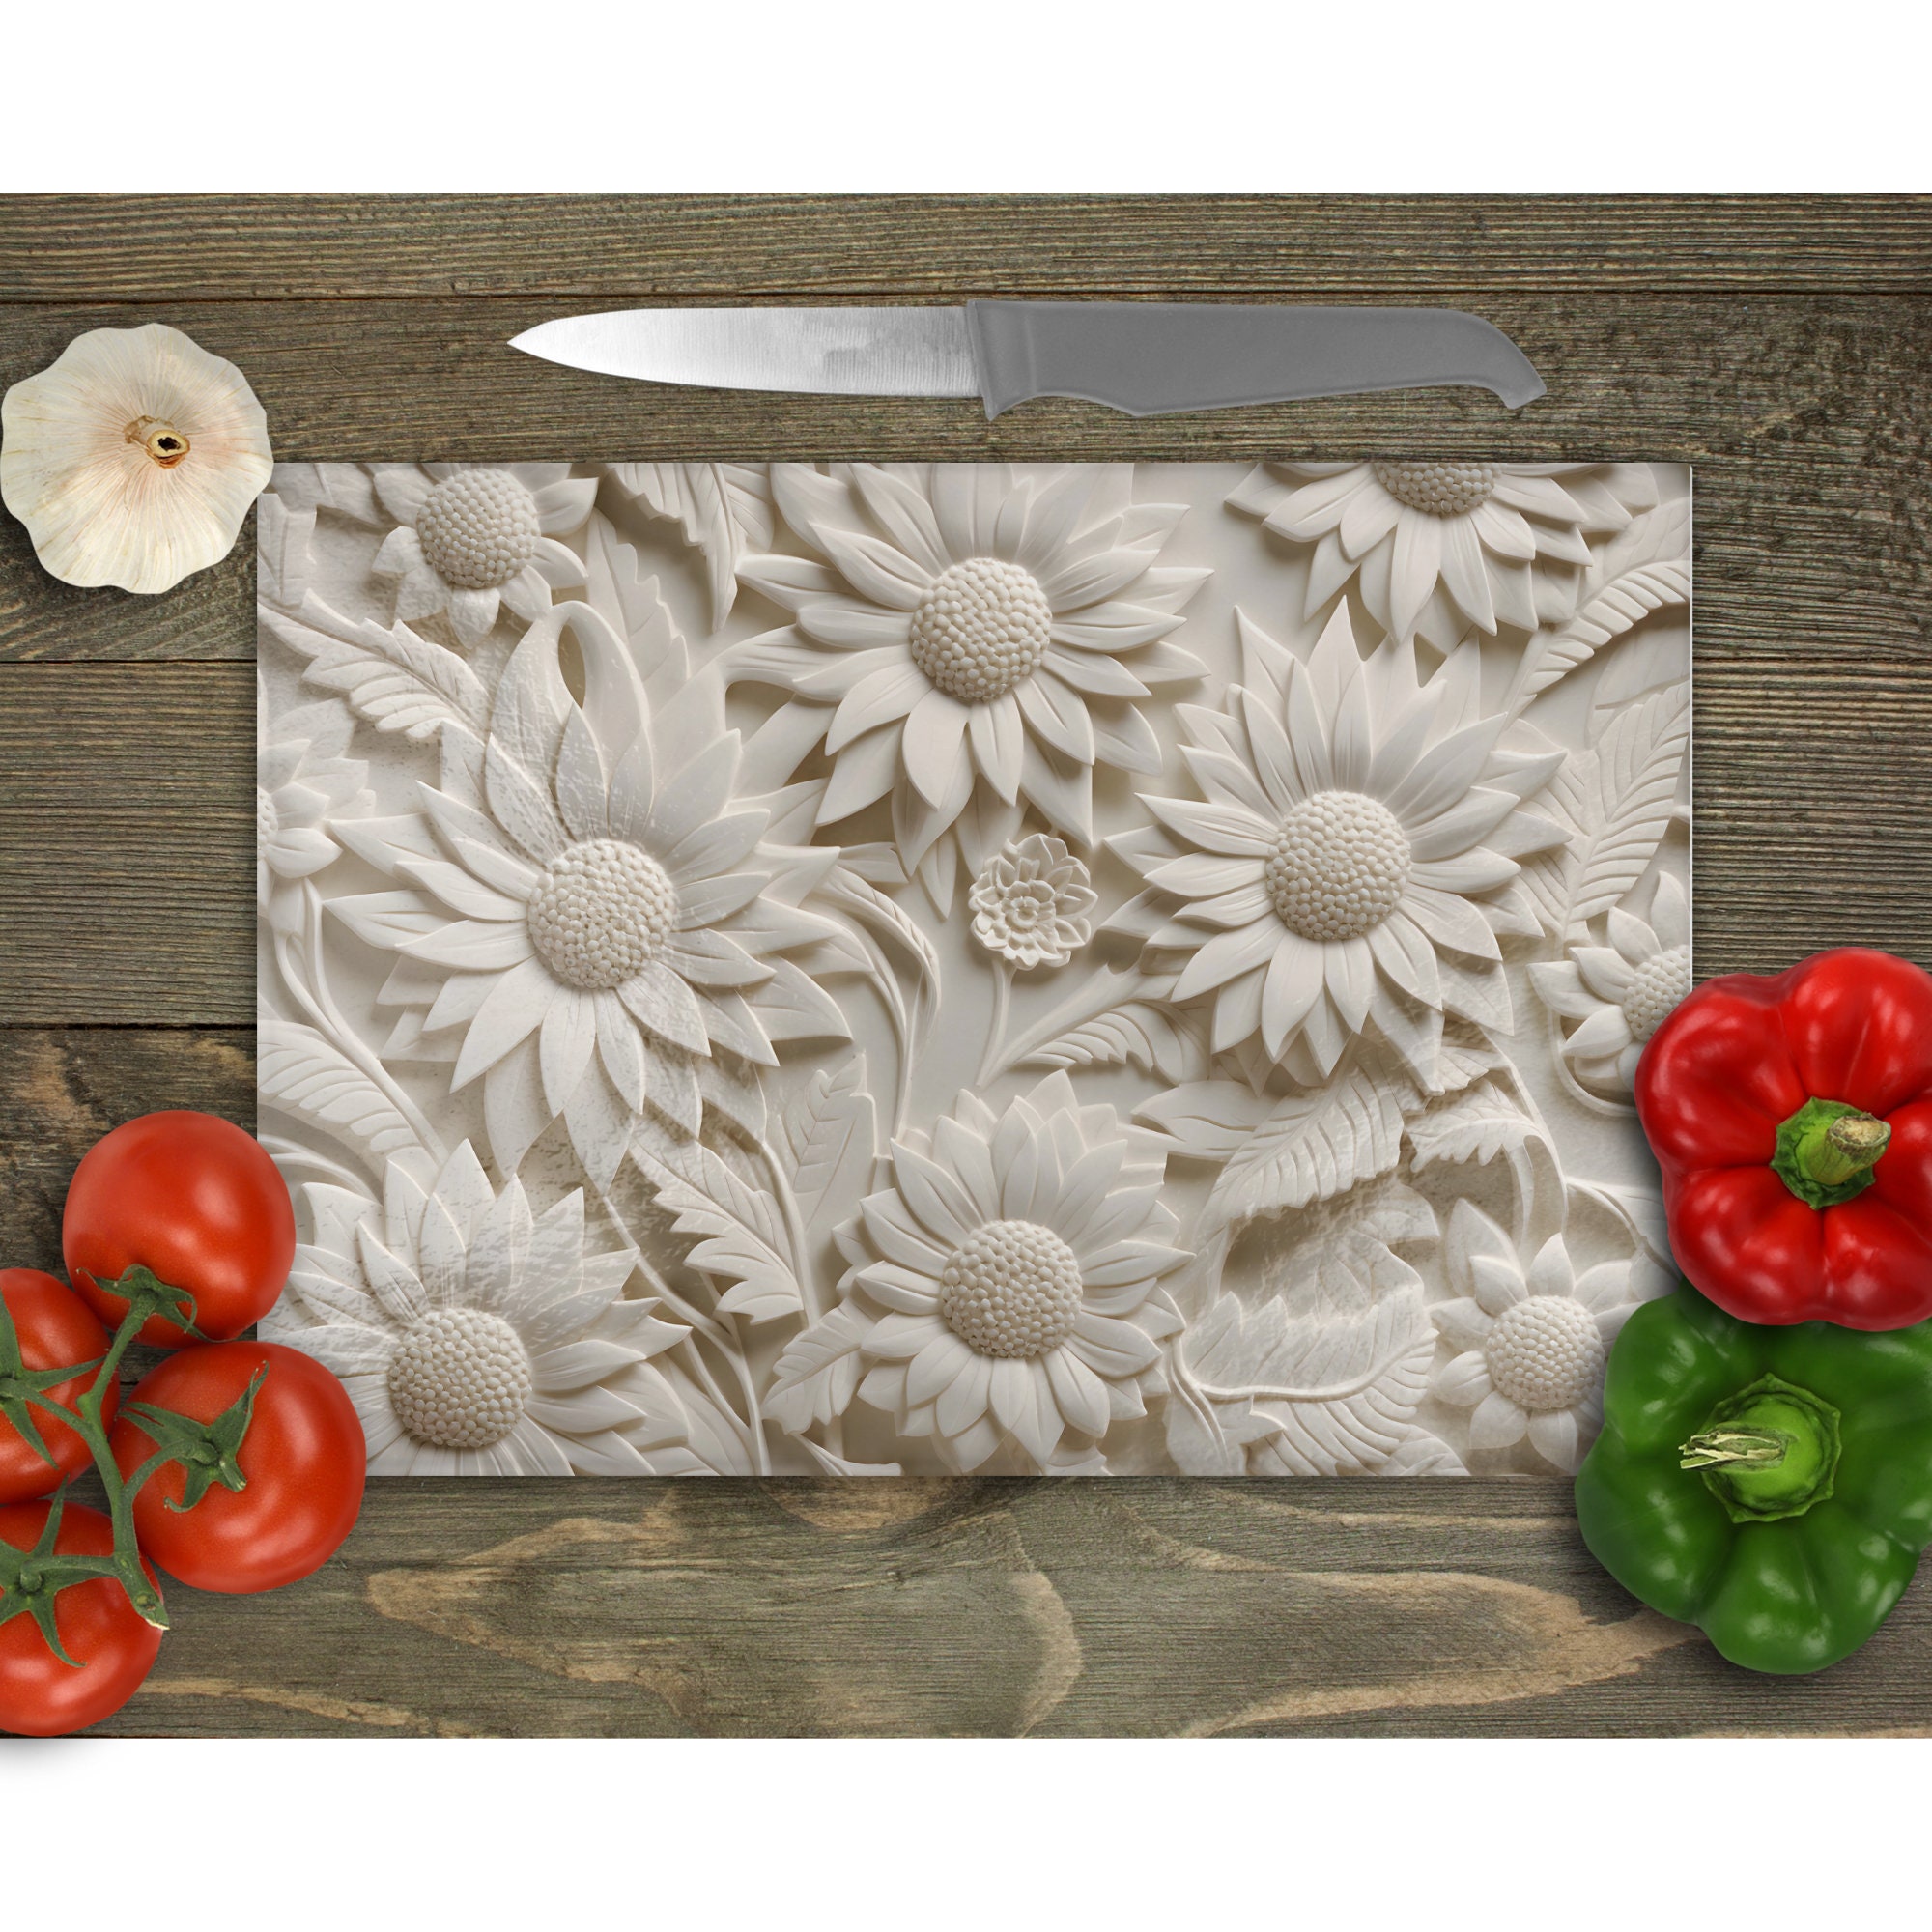 Gigantic KITCHEN BOARD & Induction Cooktop Cover Watercolor Flowers 